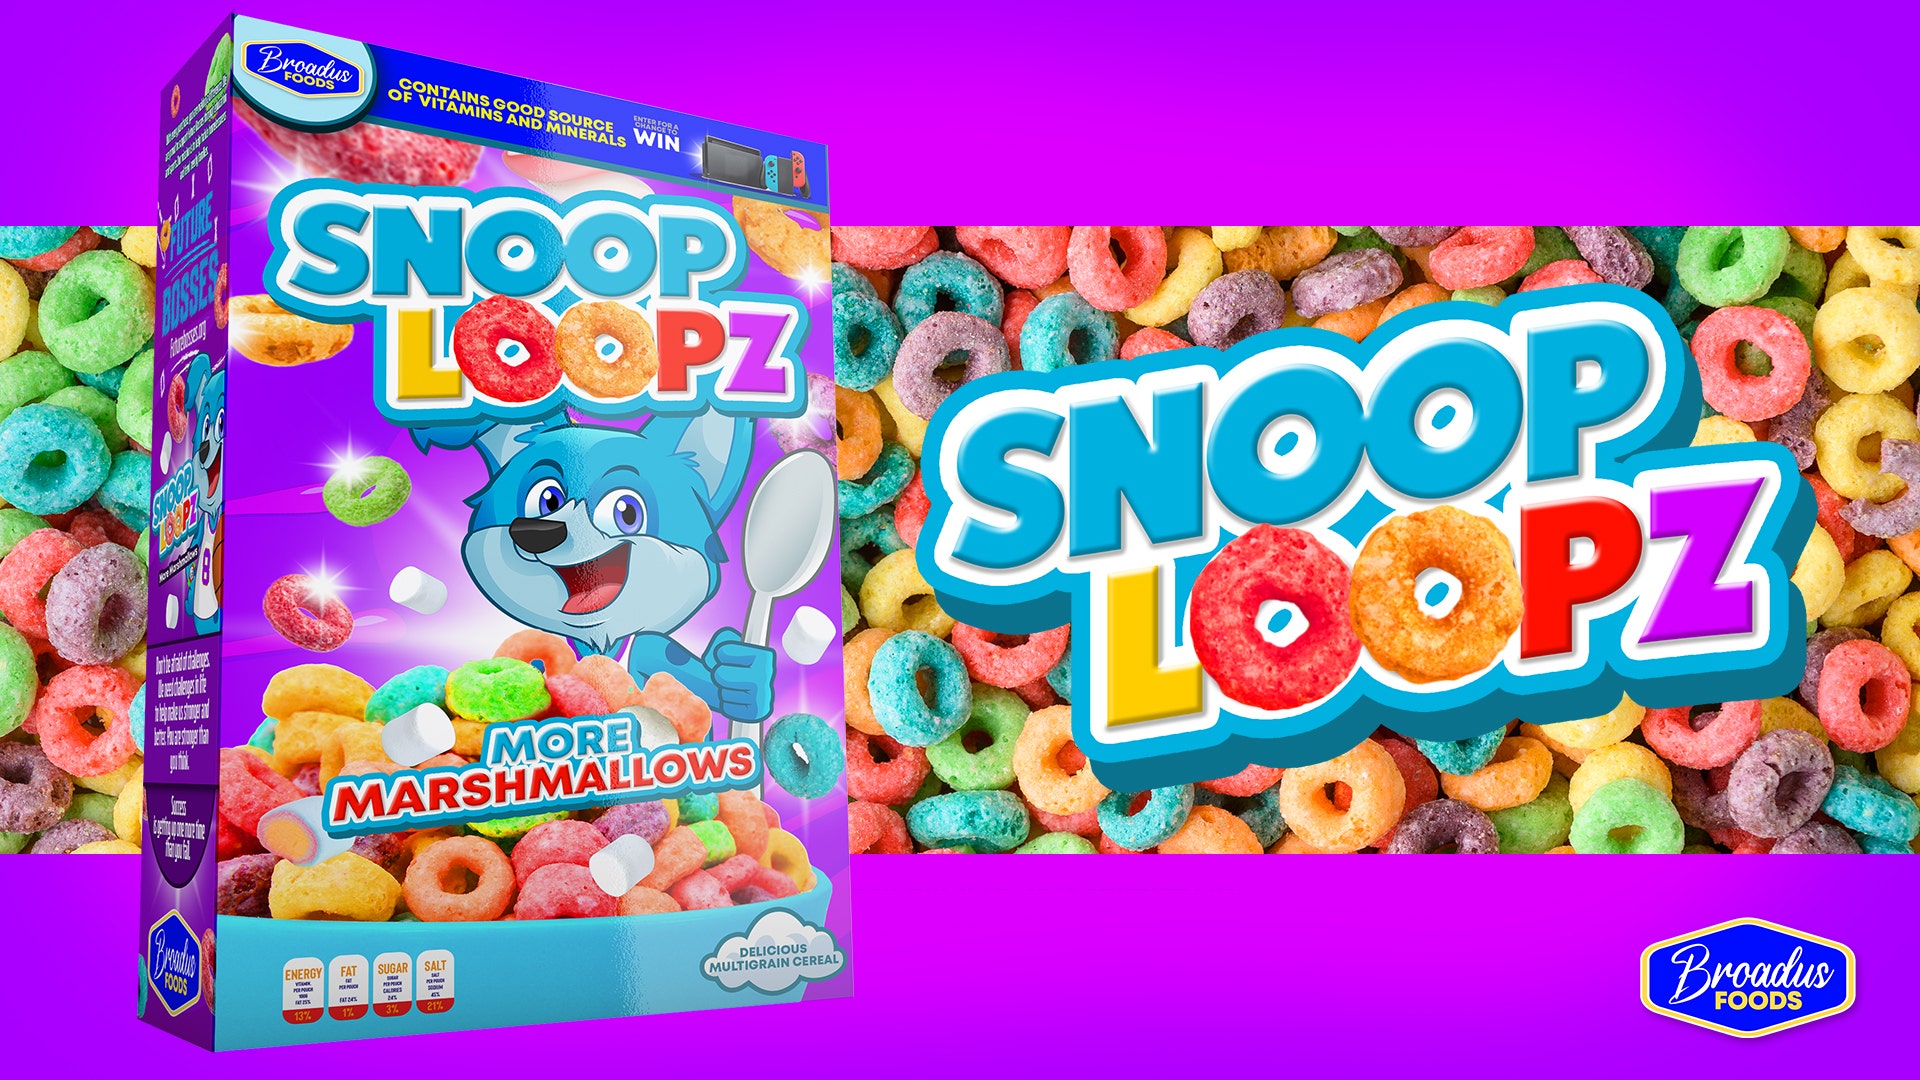 Snoop Dogg Helping Breakfast Fans: Could Trademark For Snoop Loopz Take Over Cereal — Or See Kellogg's Lawsuit